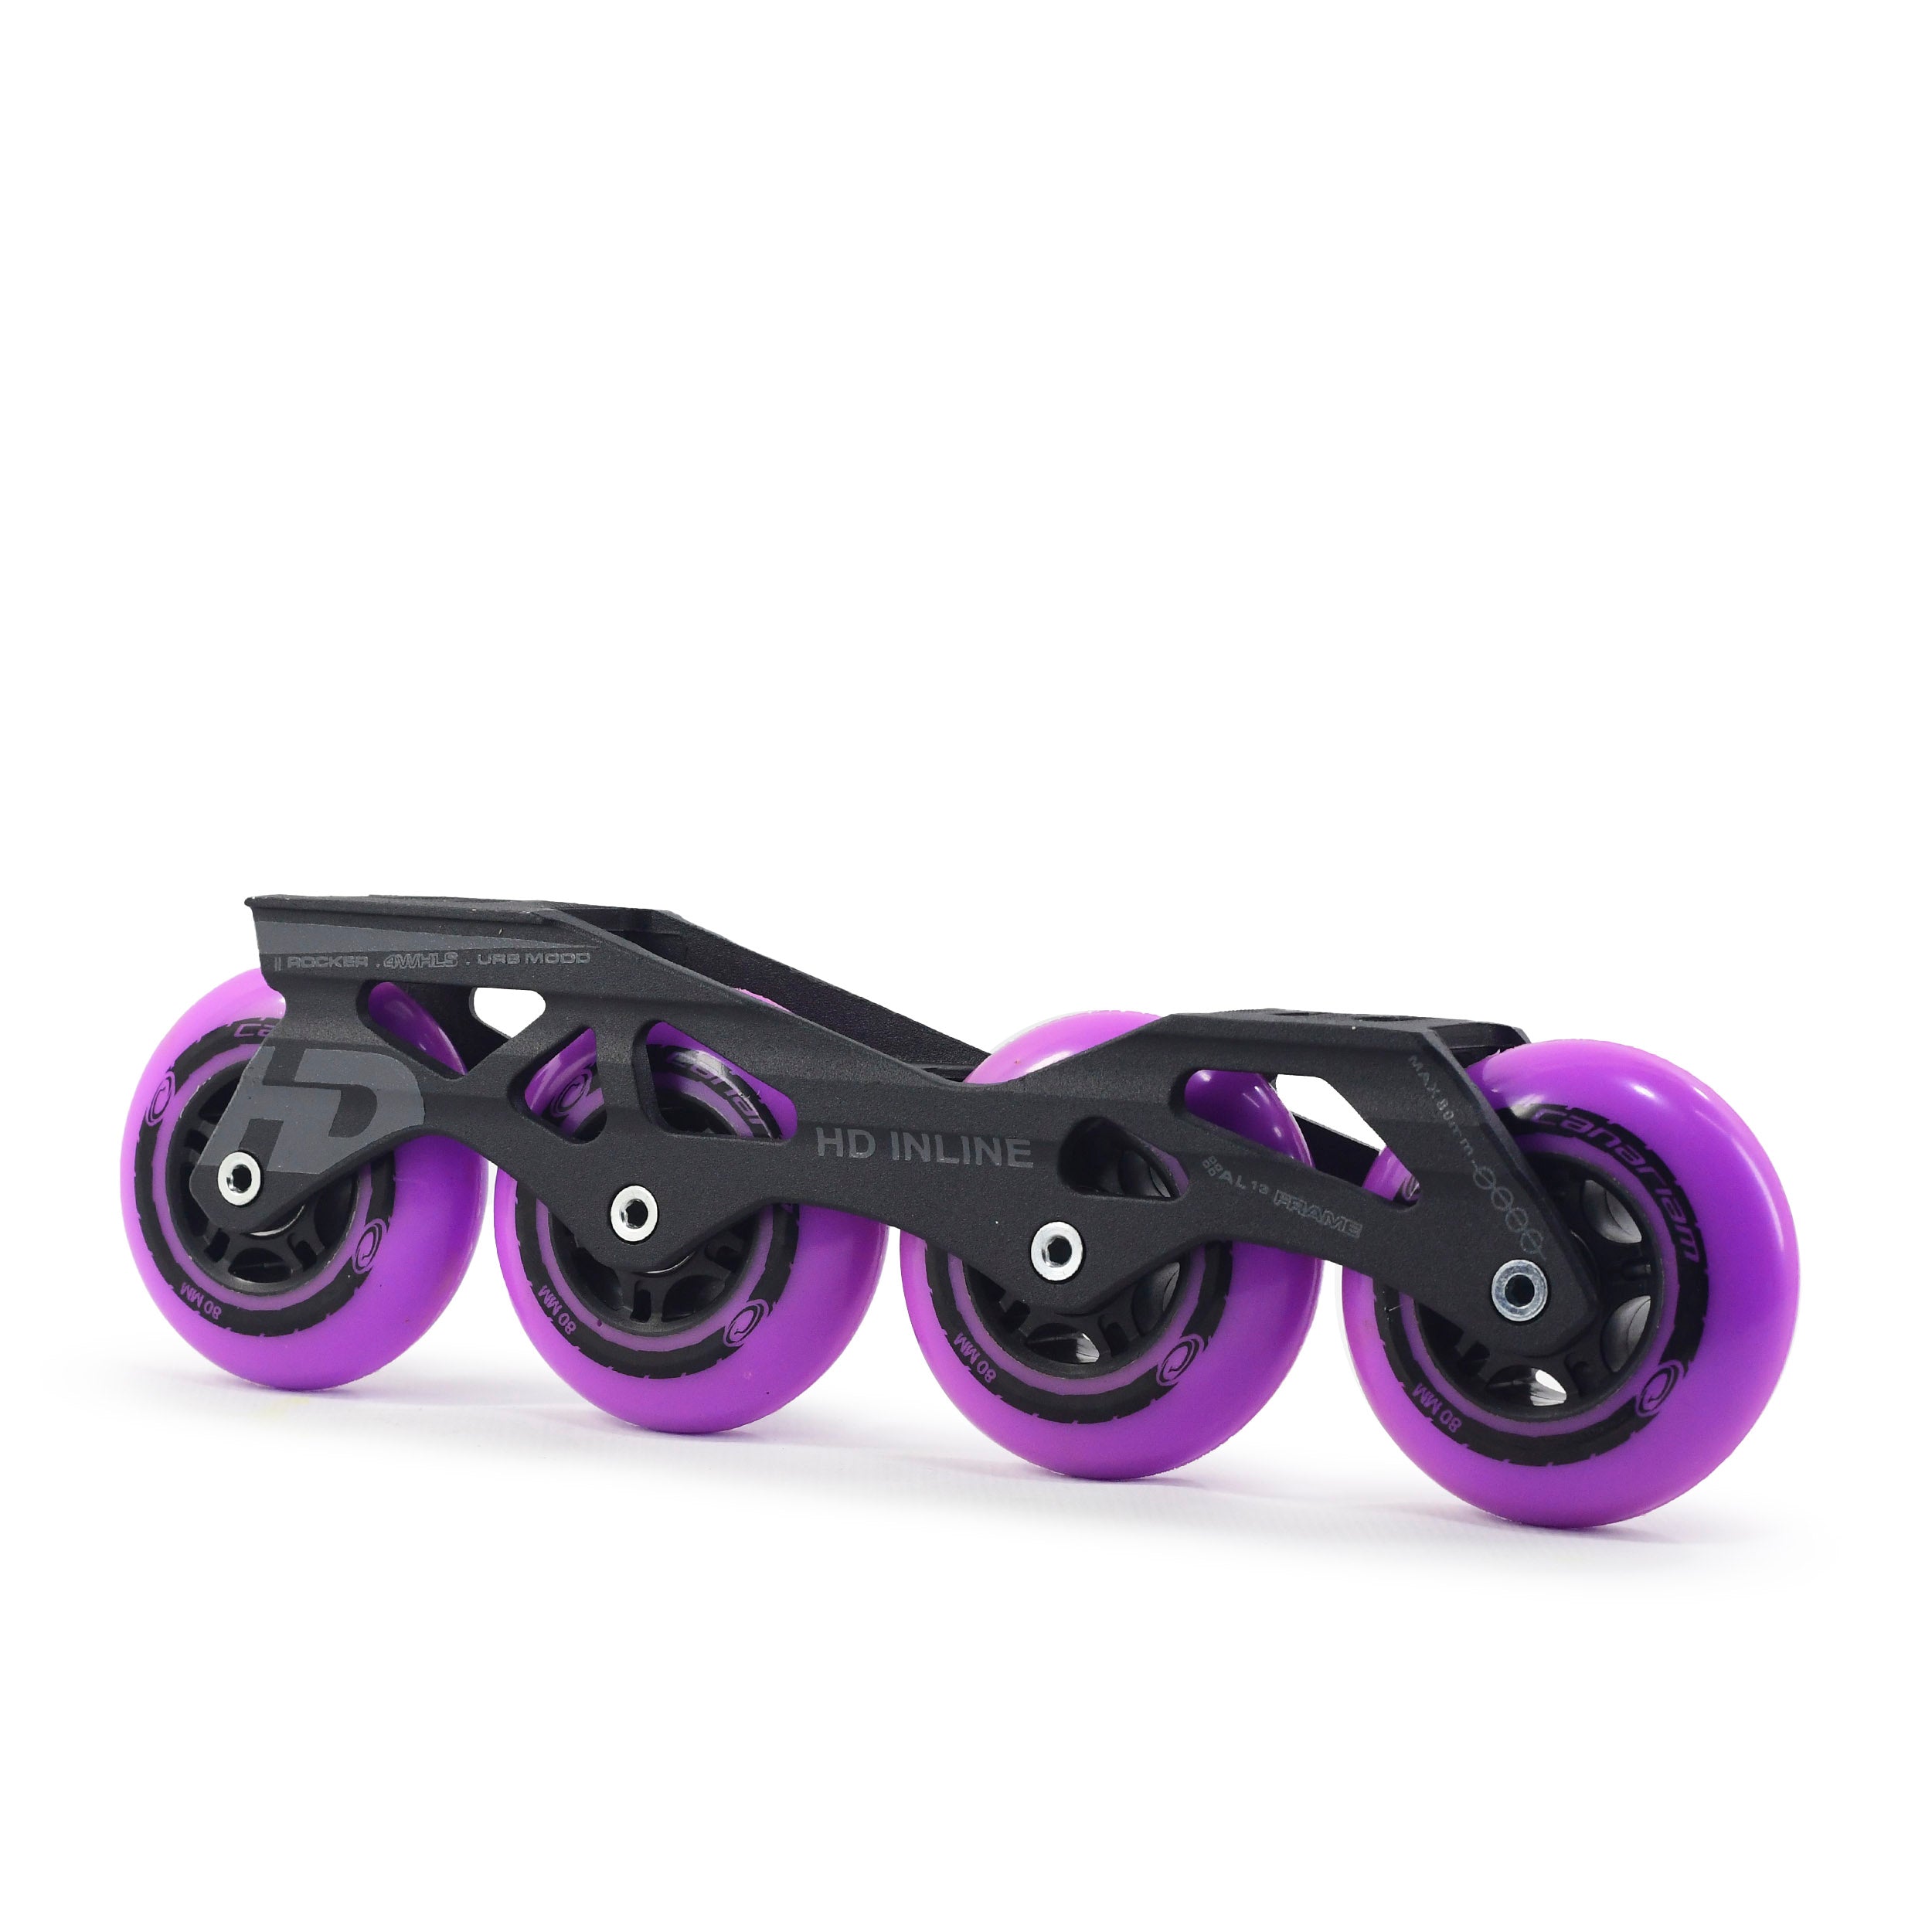 Skull Base with Canariam Matte Wheels 84mm hardness 85a Abec9